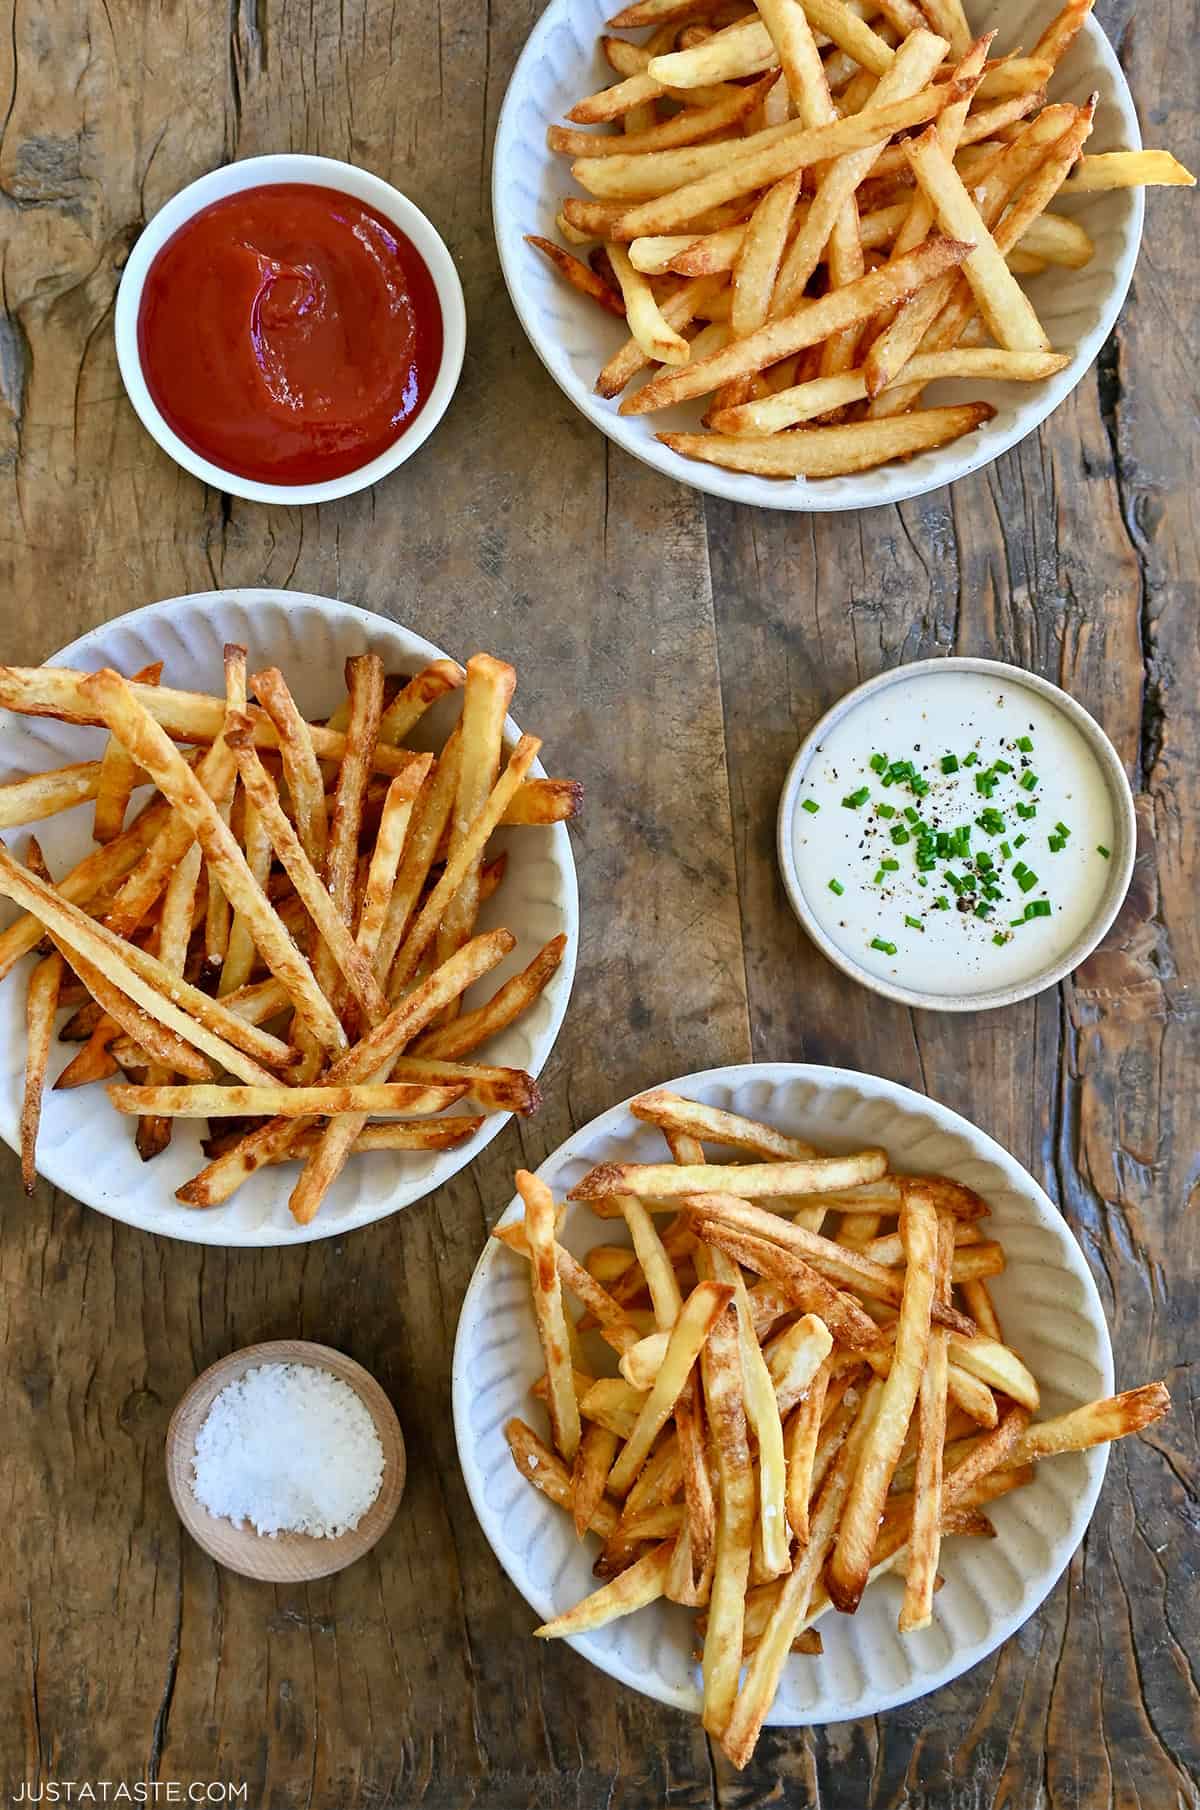 French fries three ways: deep fried, air fried and baked. Three smalls bowls containing ketchup, ranch dressing and sea salt are nearby.